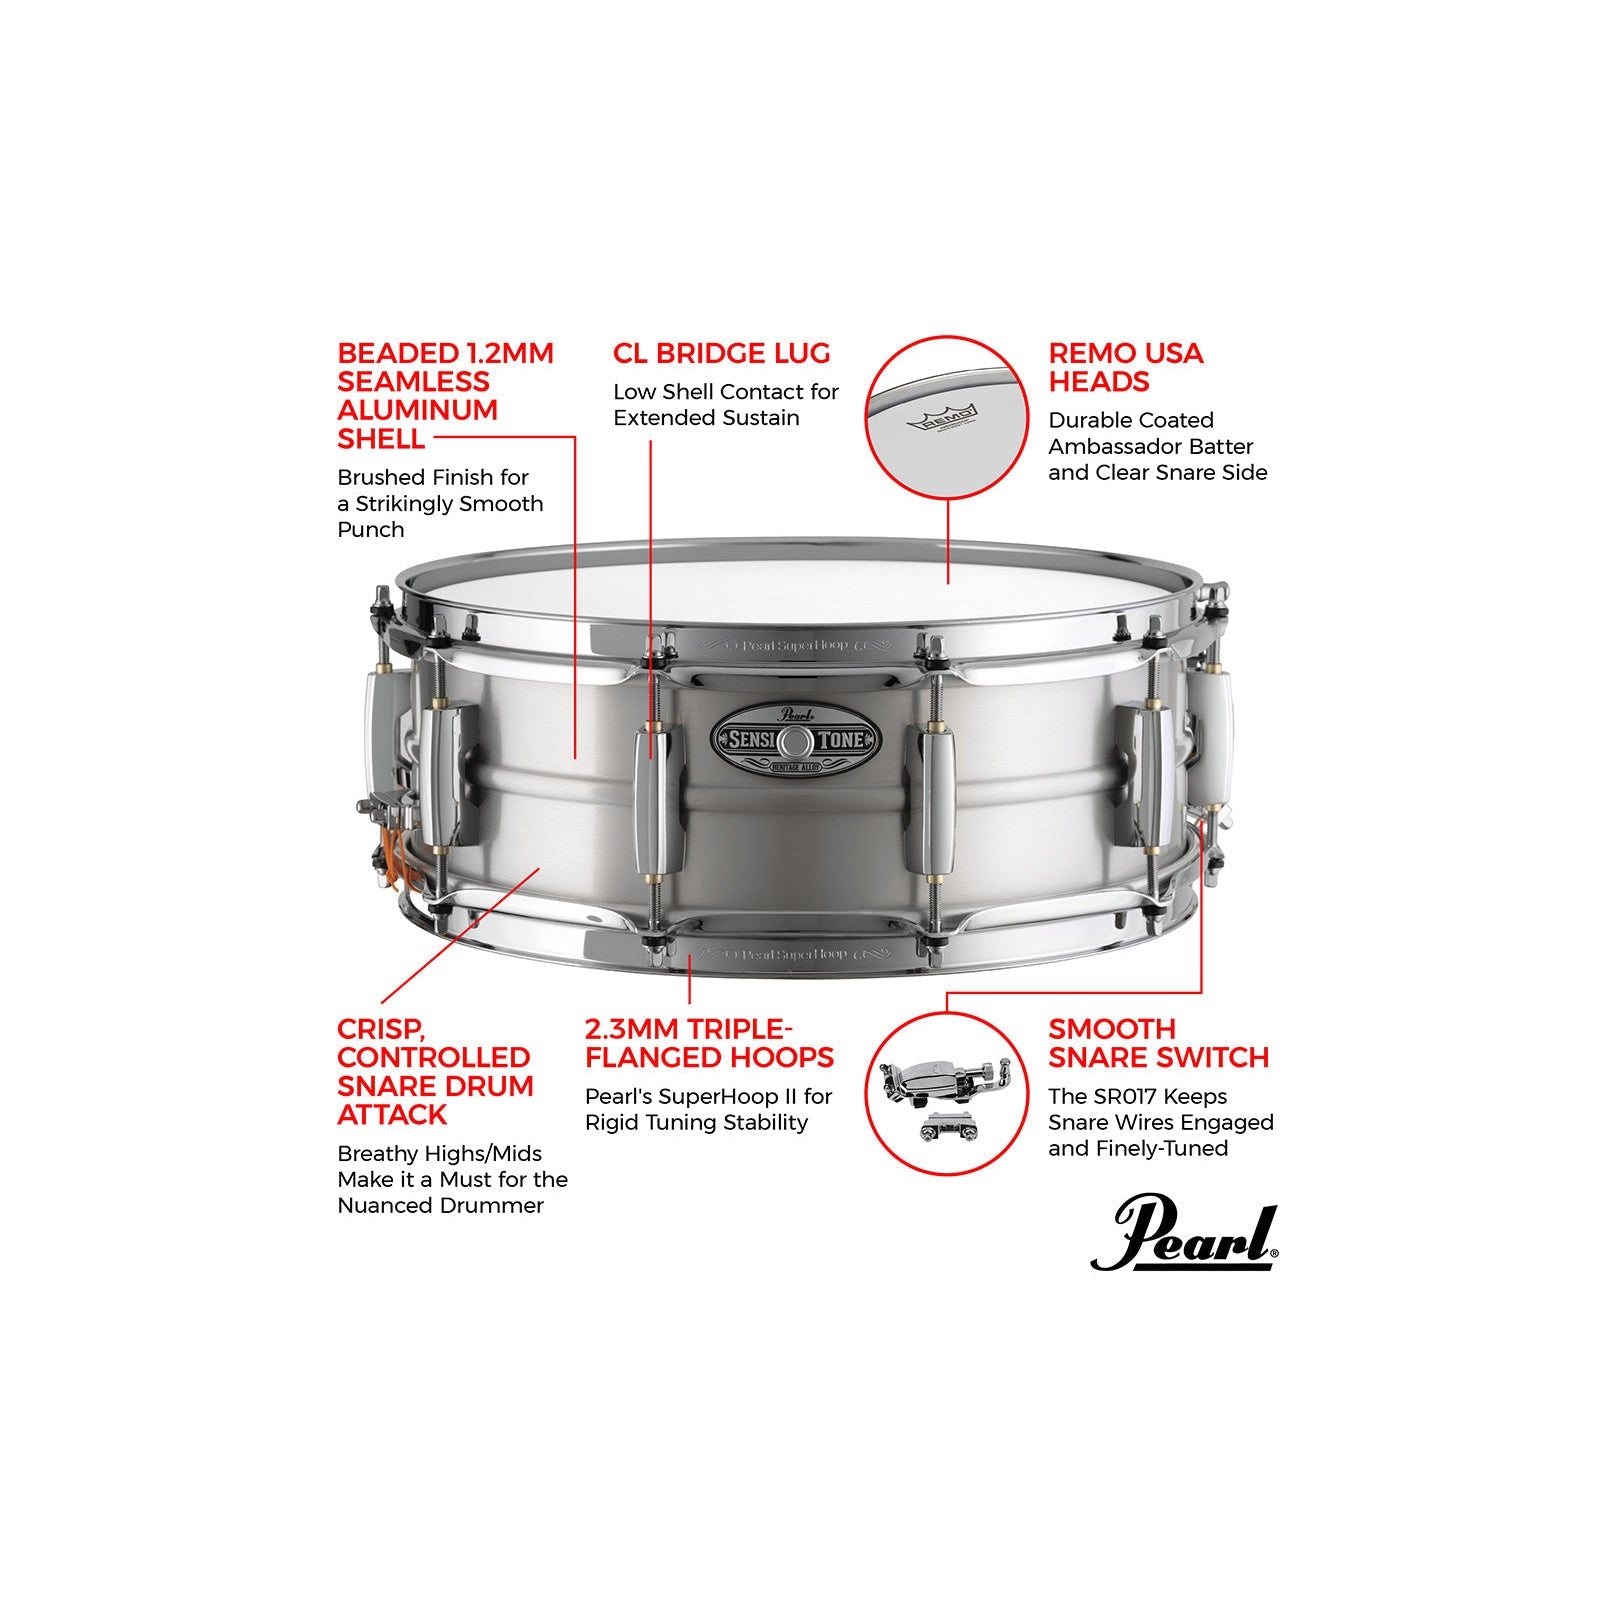 Trống Snare Pearl Sensitone Heritage Alloy Aluminum - Việt Music